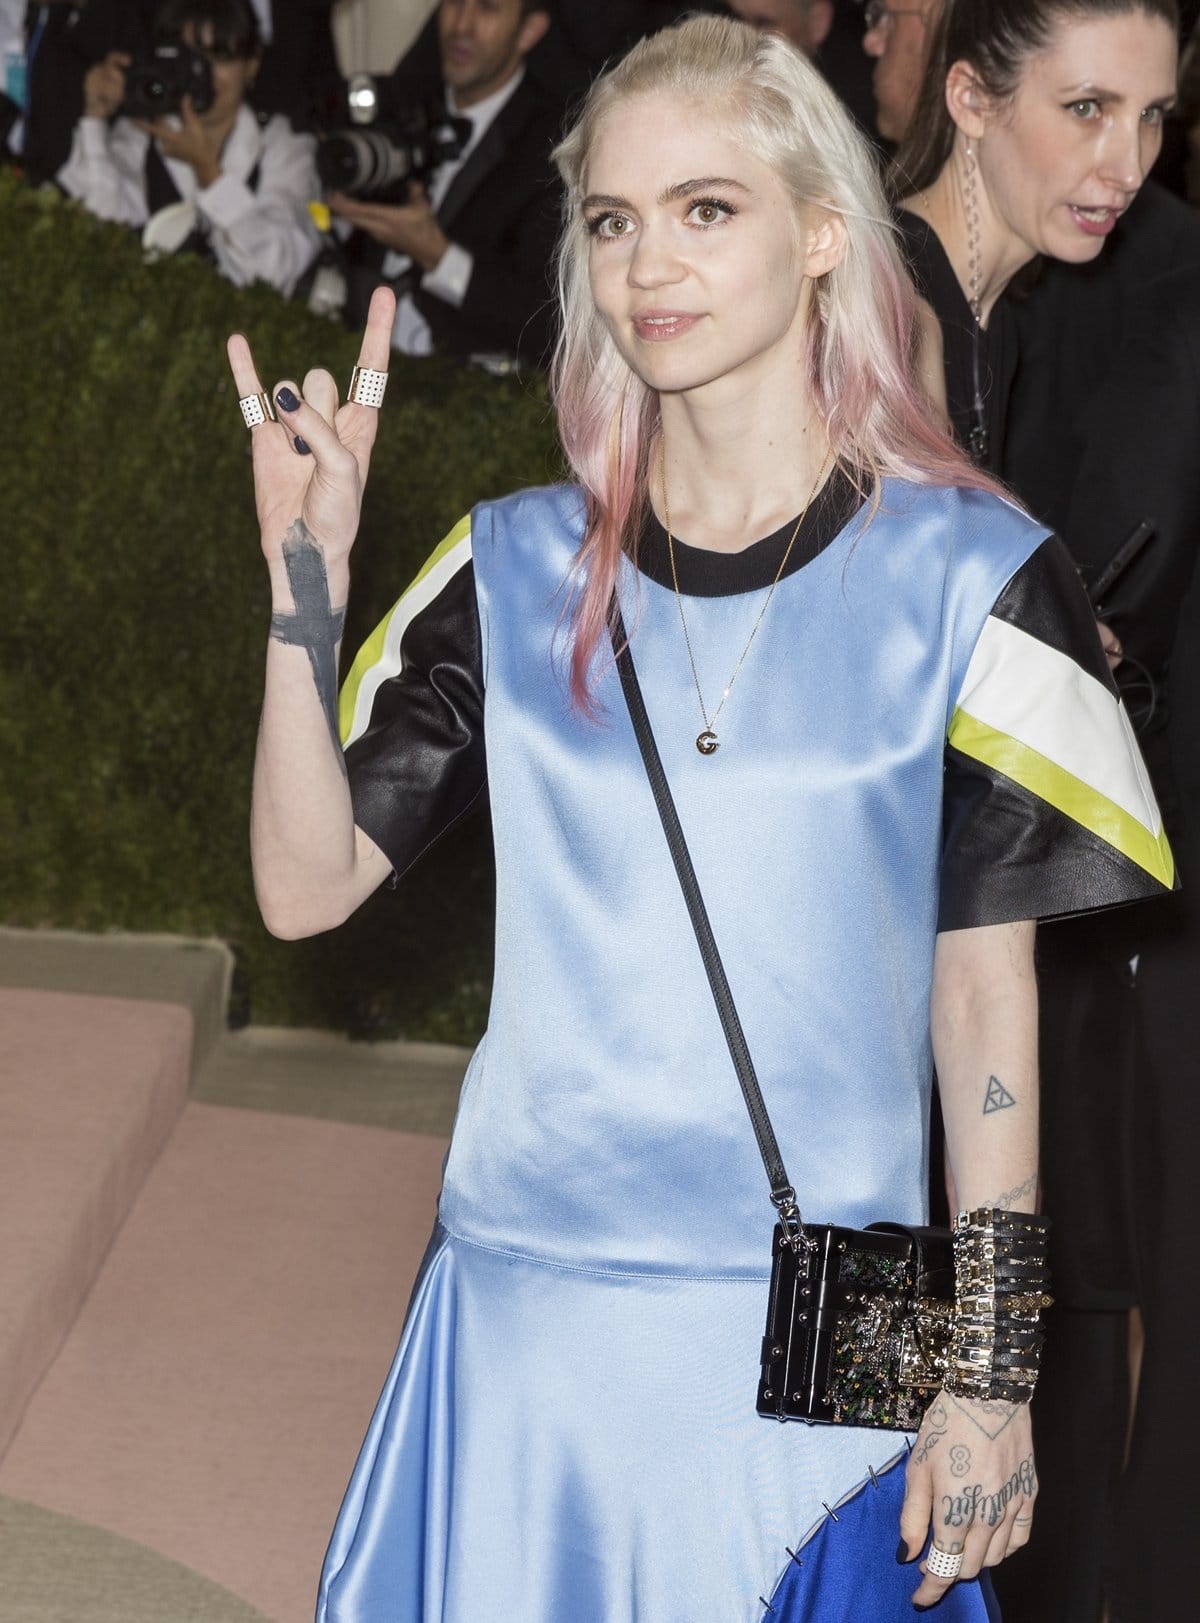 Grimes wearing Louis Vuitton by Nicolas Ghesquiere at the "Manus x Machina: Fashion in an Age of Technology", the 2016 Costume Institute Gala at the Metropolitan Museum of Art